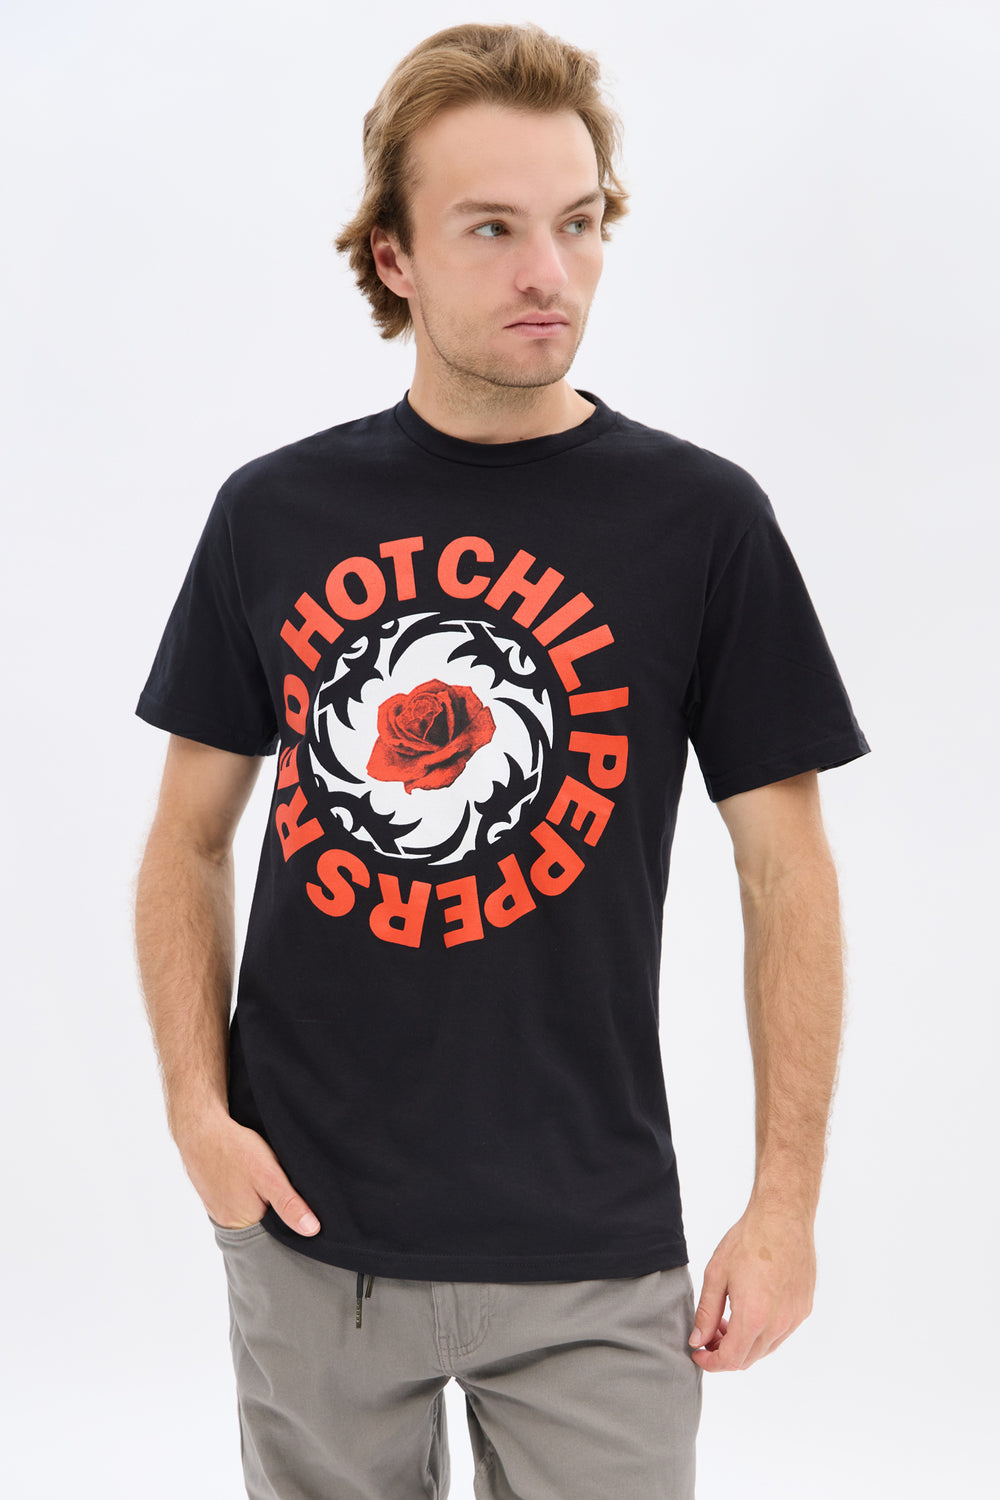 Mens Red Hot Chili Peppers T-Shirt Mens Red Hot Chili Peppers T-Shirt